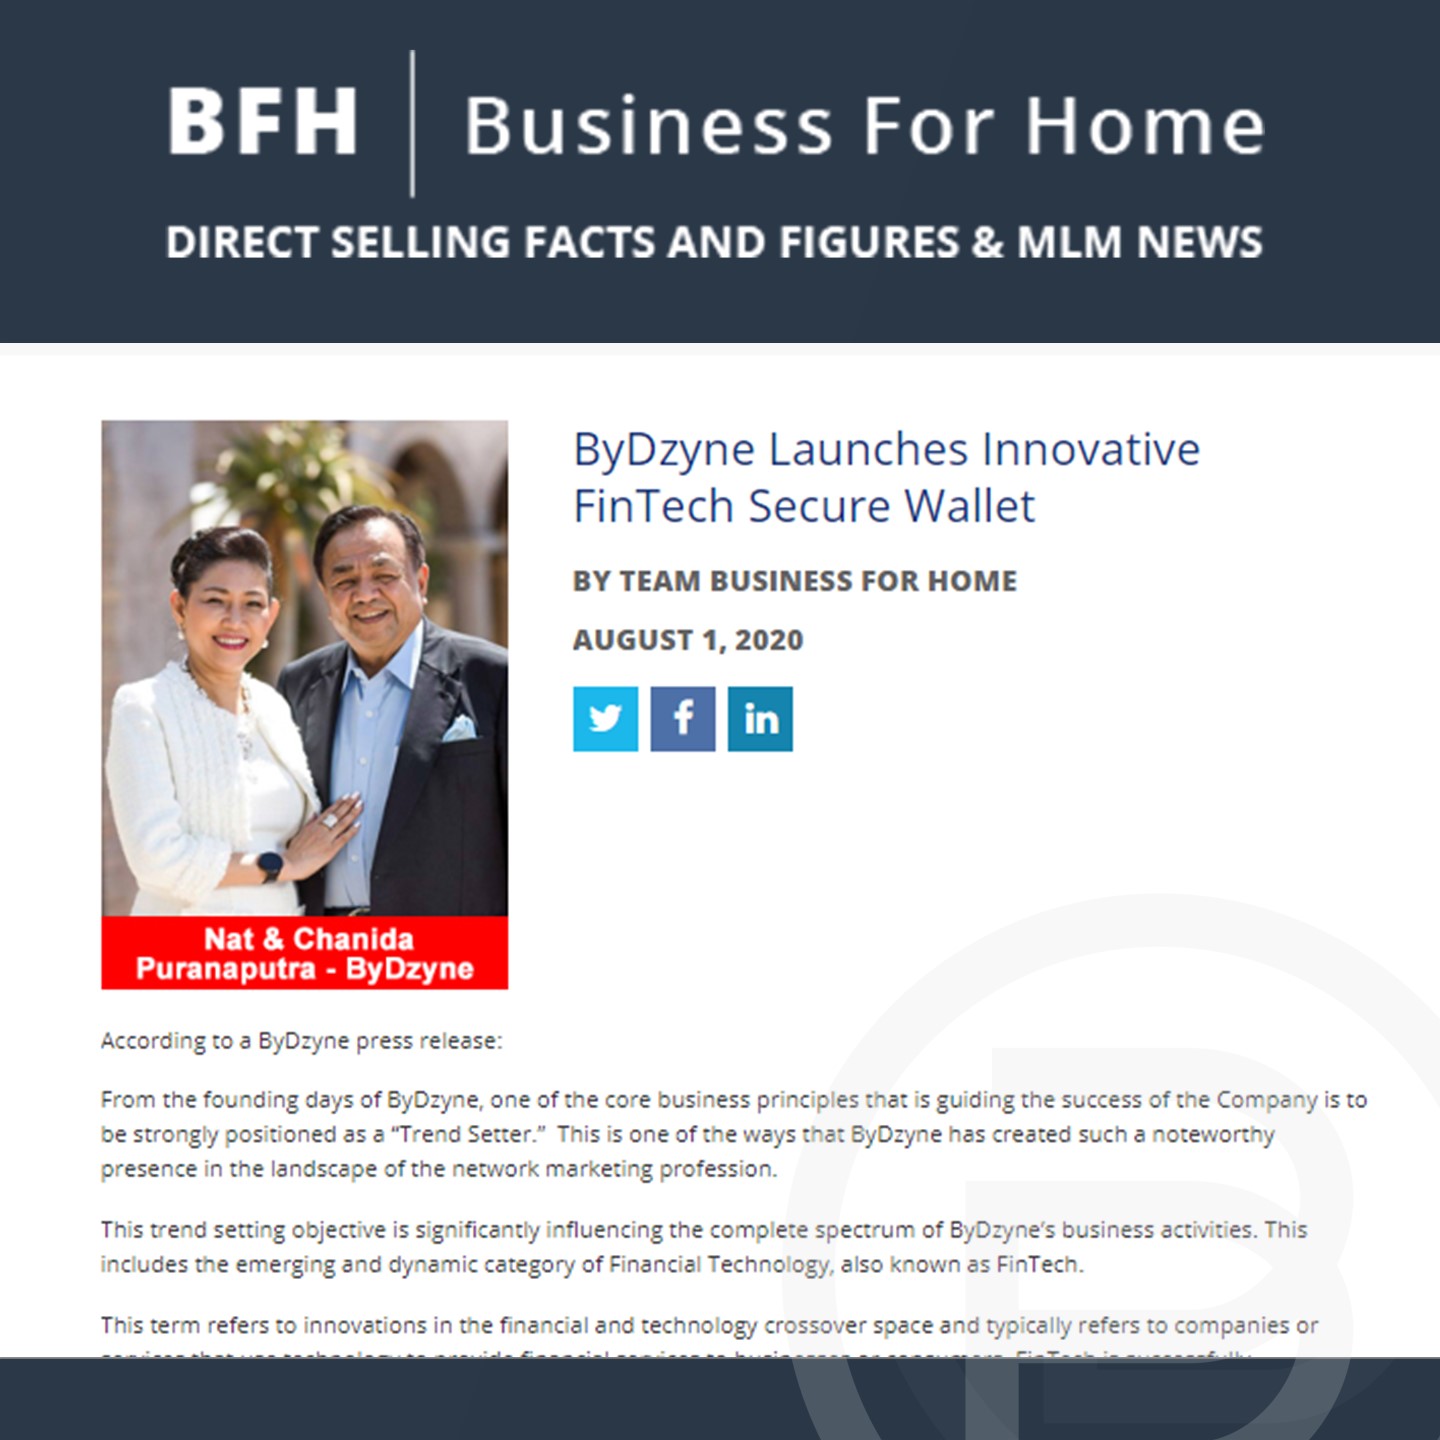 BFH: ByDzyne Launches Innovative FinTech Secure Wallet